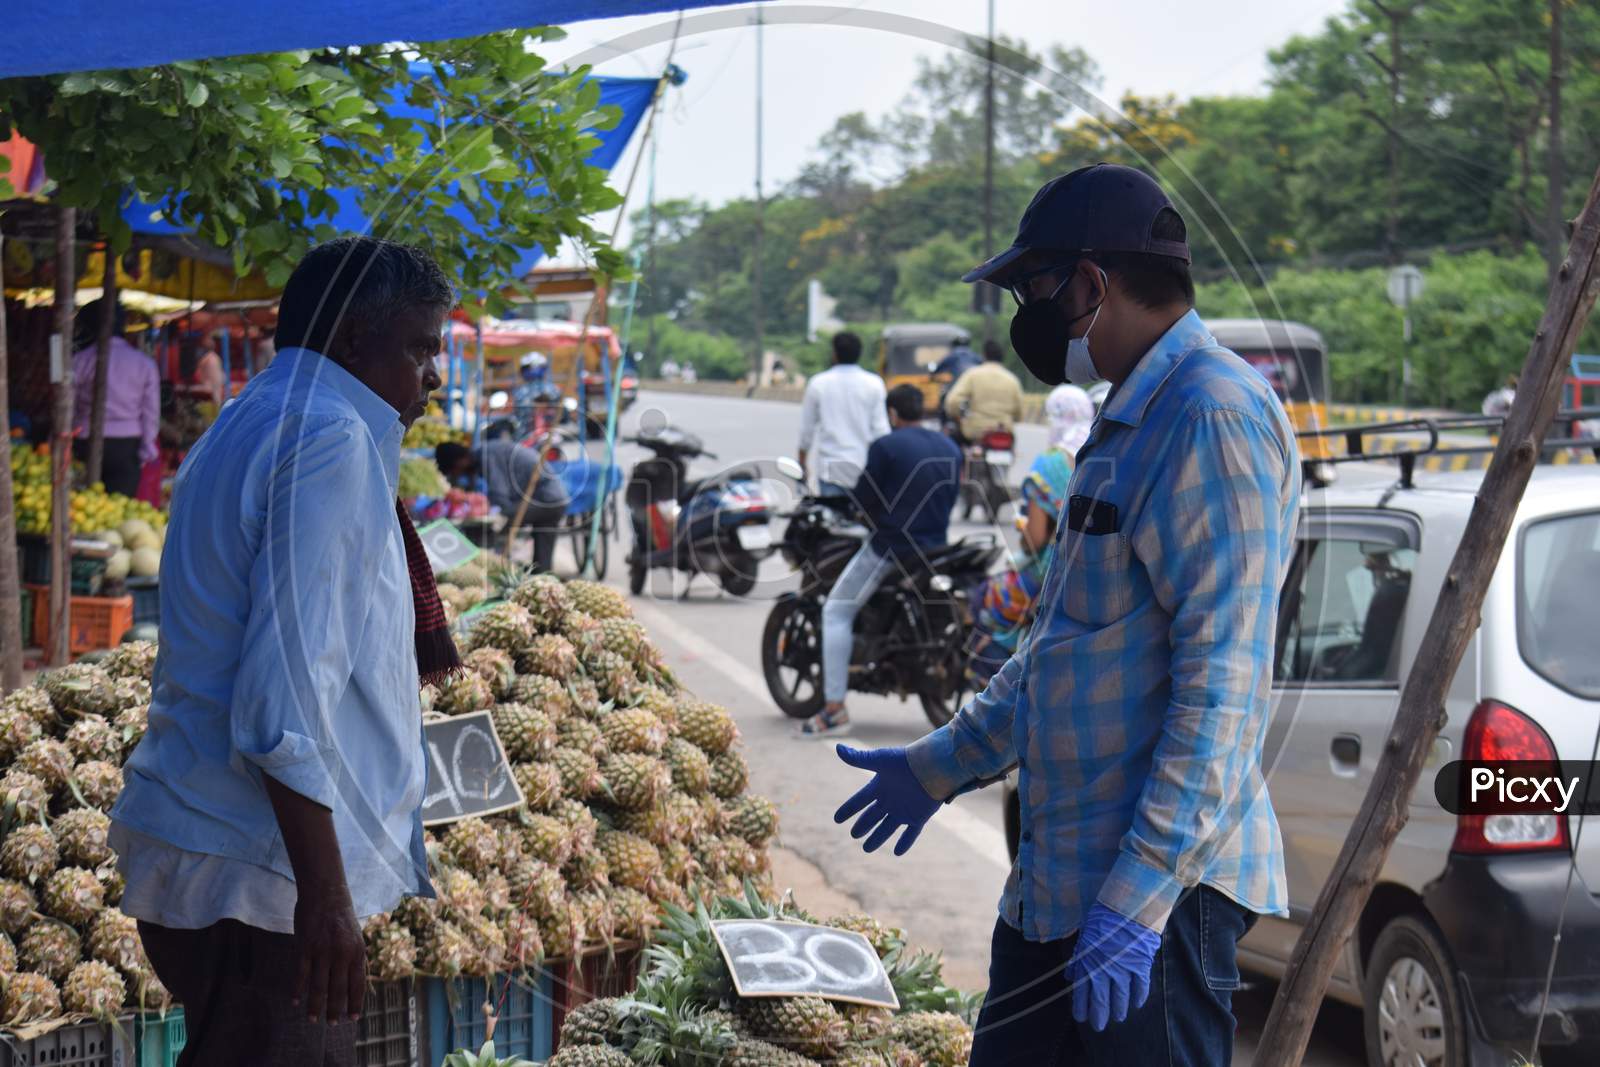 Hyderabad, Telangana, India. july-22-2020: fruits at road side, fruits trader selling fruits at road side while wearing face mask for protection from the coronavirus, corona pandemic time, peoples are wearing protective masks while buying fruits